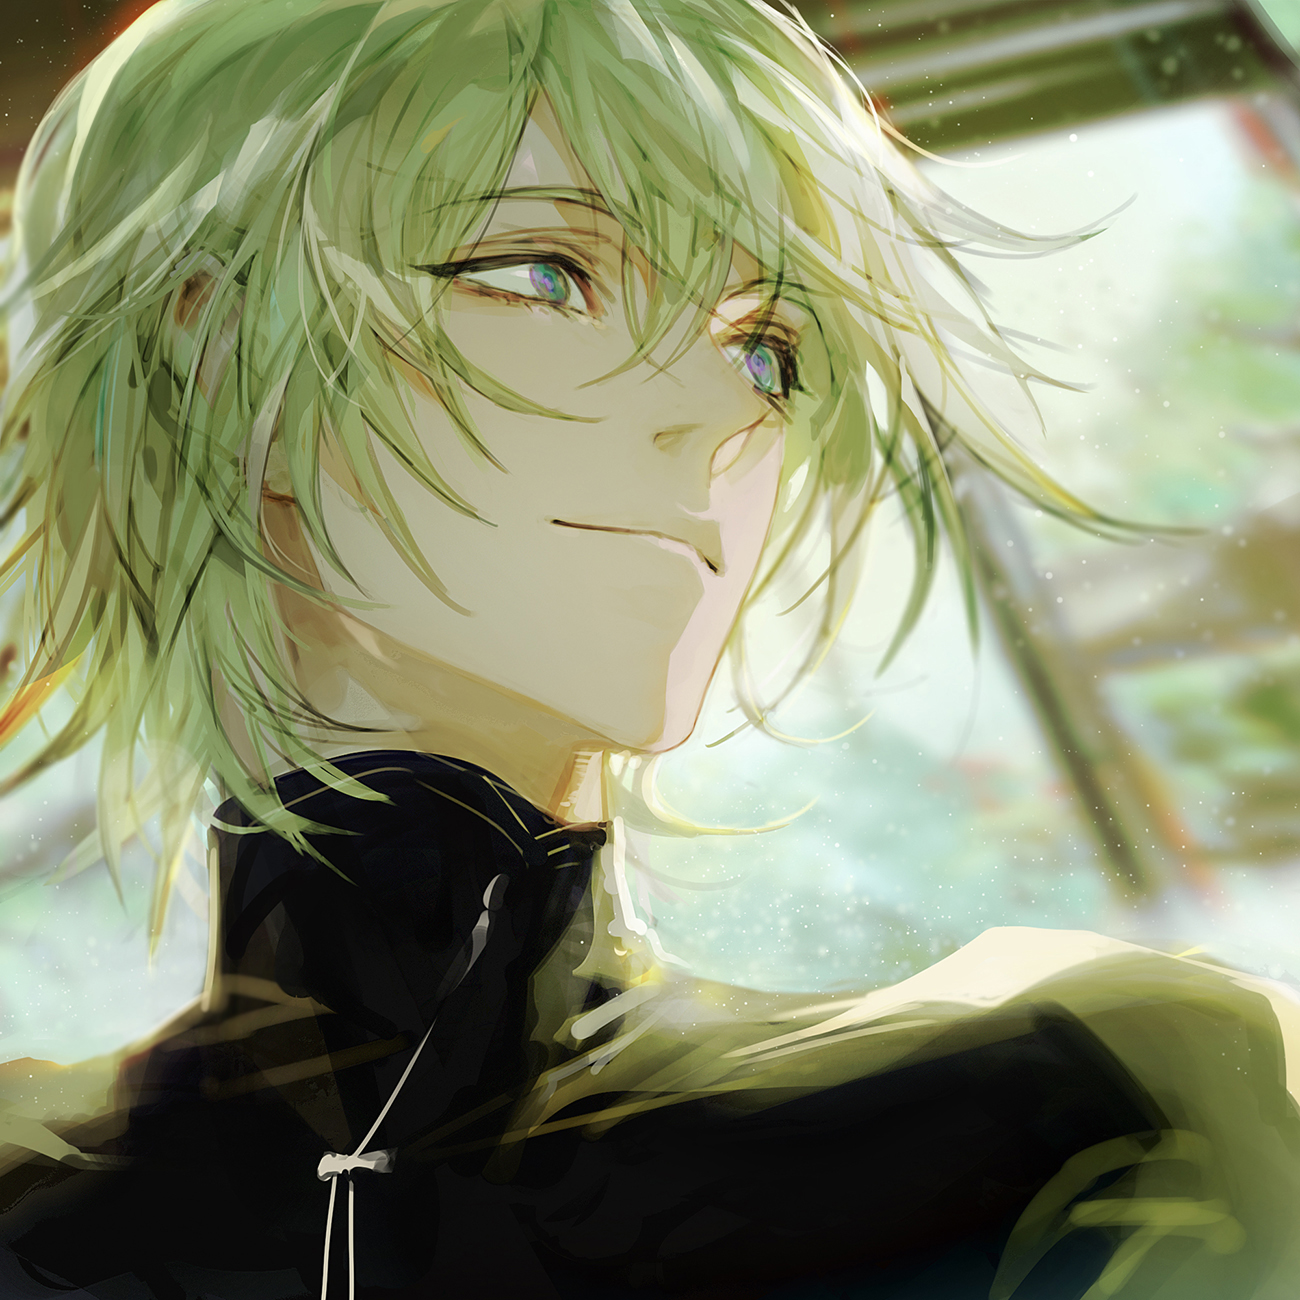 messy-rail589: Handsome hottie looking teenager boy that has a cool dark green  hair with lime color highlights and his deadly eyes are green.